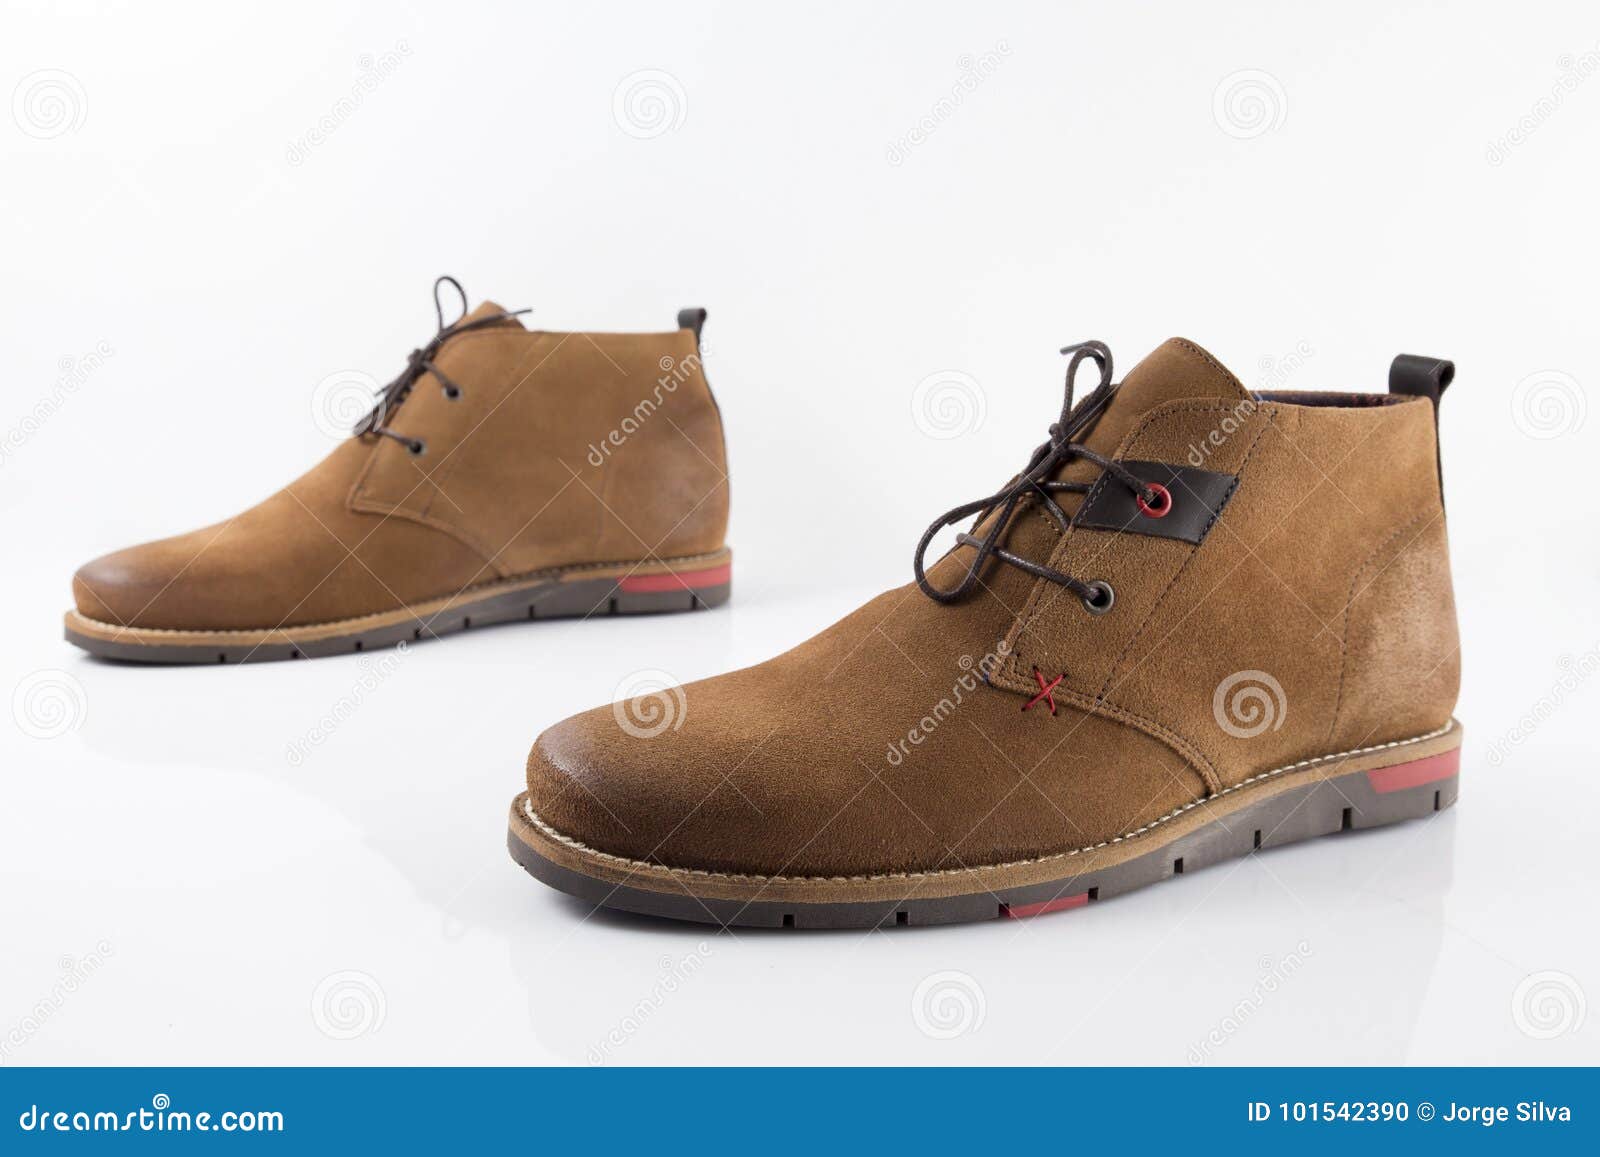 Male Brown Leather Shoe on White Background Stock Photo - Image of ...